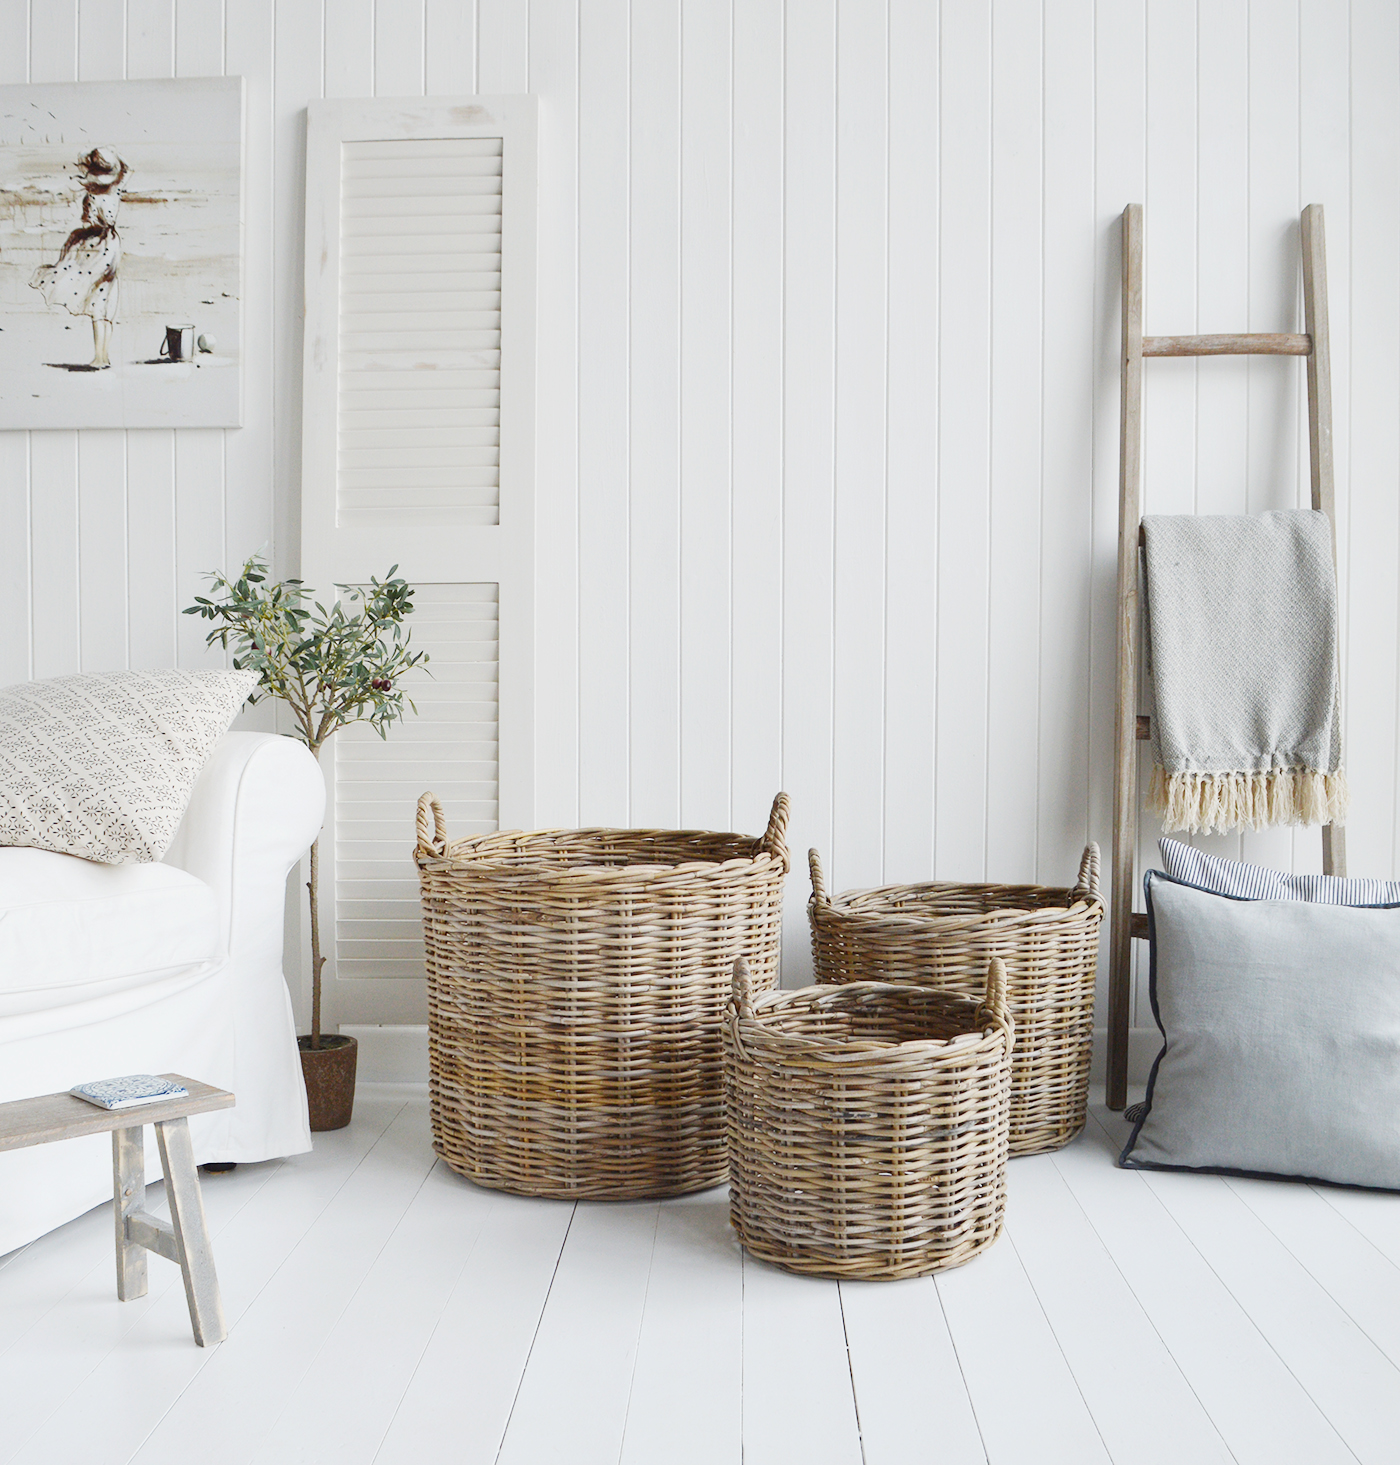 Casco Bay extra large Round basket with handles for logs, toys and everyday storage from The White Lighthouse Furniture and Home Interiors for New England, country, coastal , modern farmhouse and city homes for hallway, living room, bedroom and bathroom